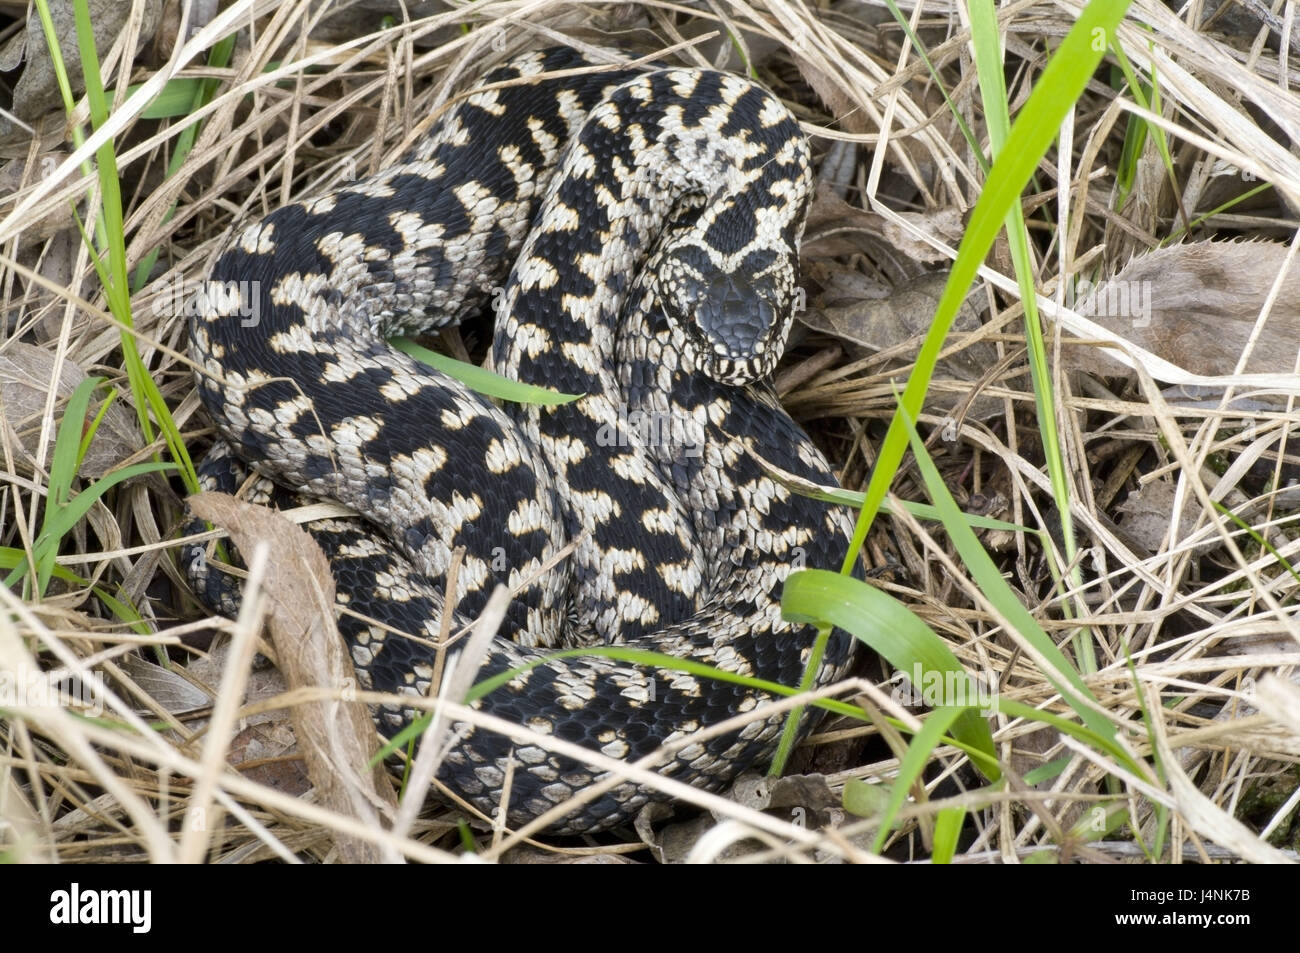 Meadow, common viper, Vipera berus, rolled up, Germany, wild animals, animals, animal world, individually, adult, Schuppenkriechtiere, individually, queue, poisonous snake, reptiles, to vipers, vipers, ovoviviparous, toxic, grey, patterned, little men, manly, endangers, threatens, nature, curled, medium close-up, nobody, Stock Photo